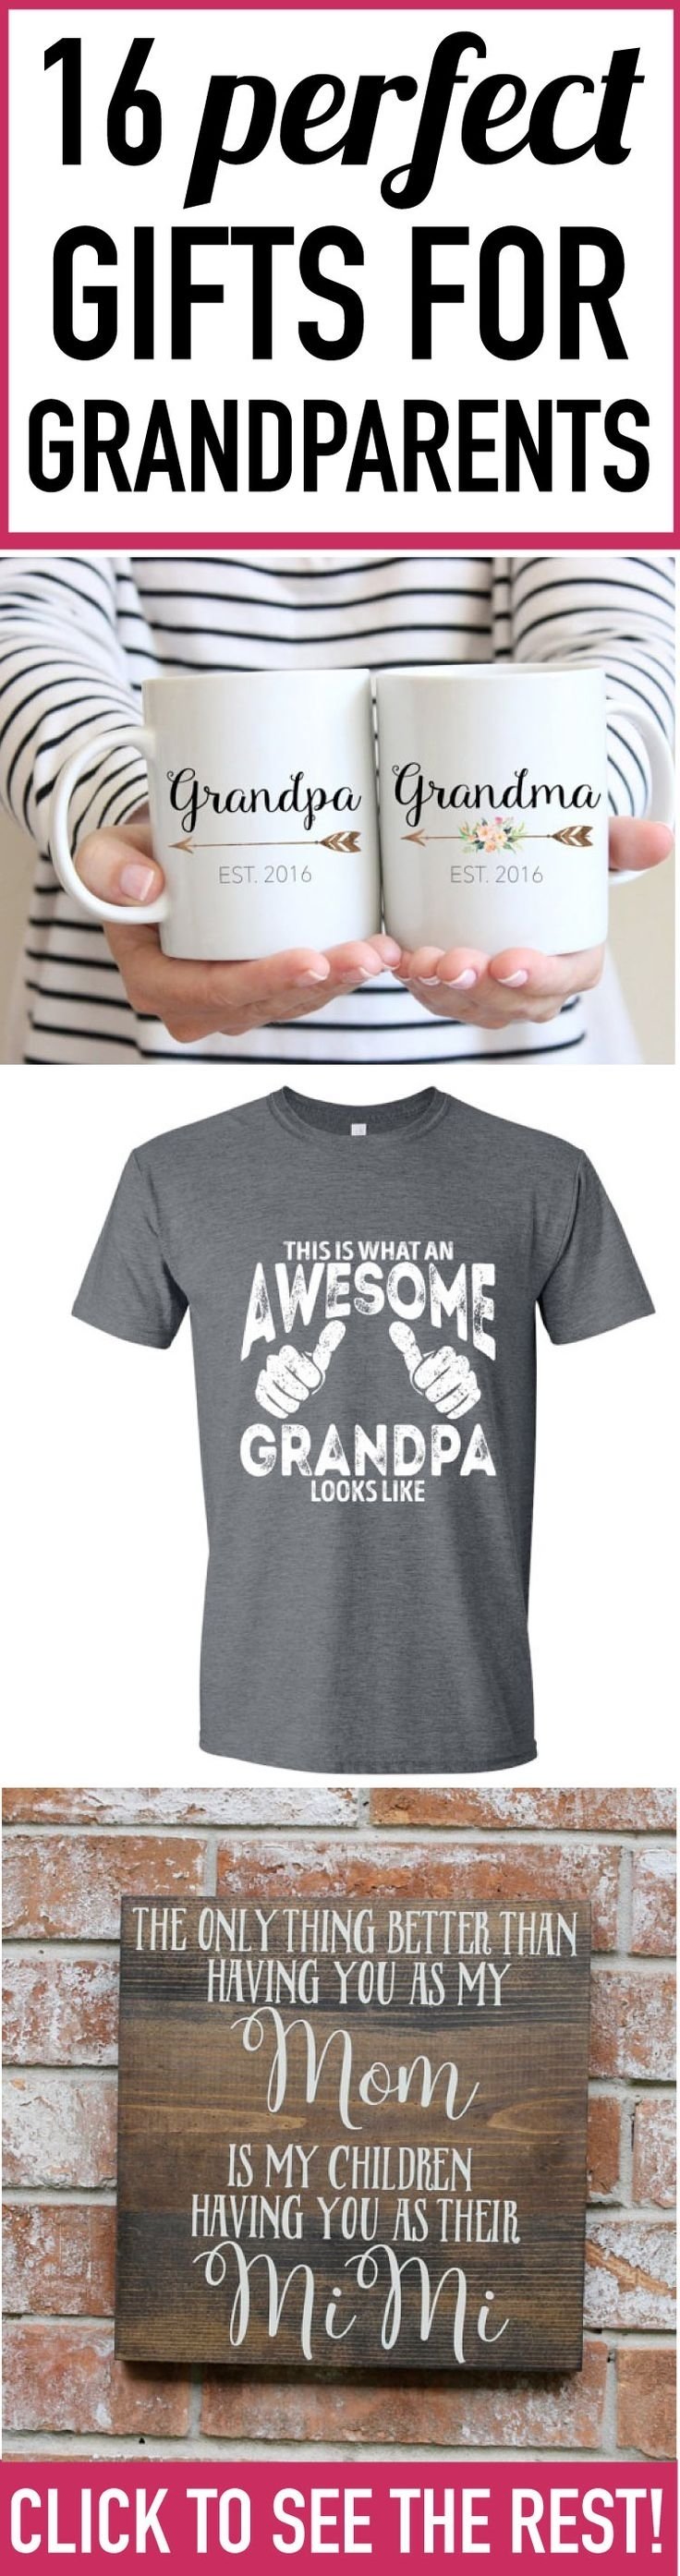 10 Fabulous Christmas Gift Ideas For Older Parents 26 best fathers day ideas images on pinterest craft kids crafts 2022